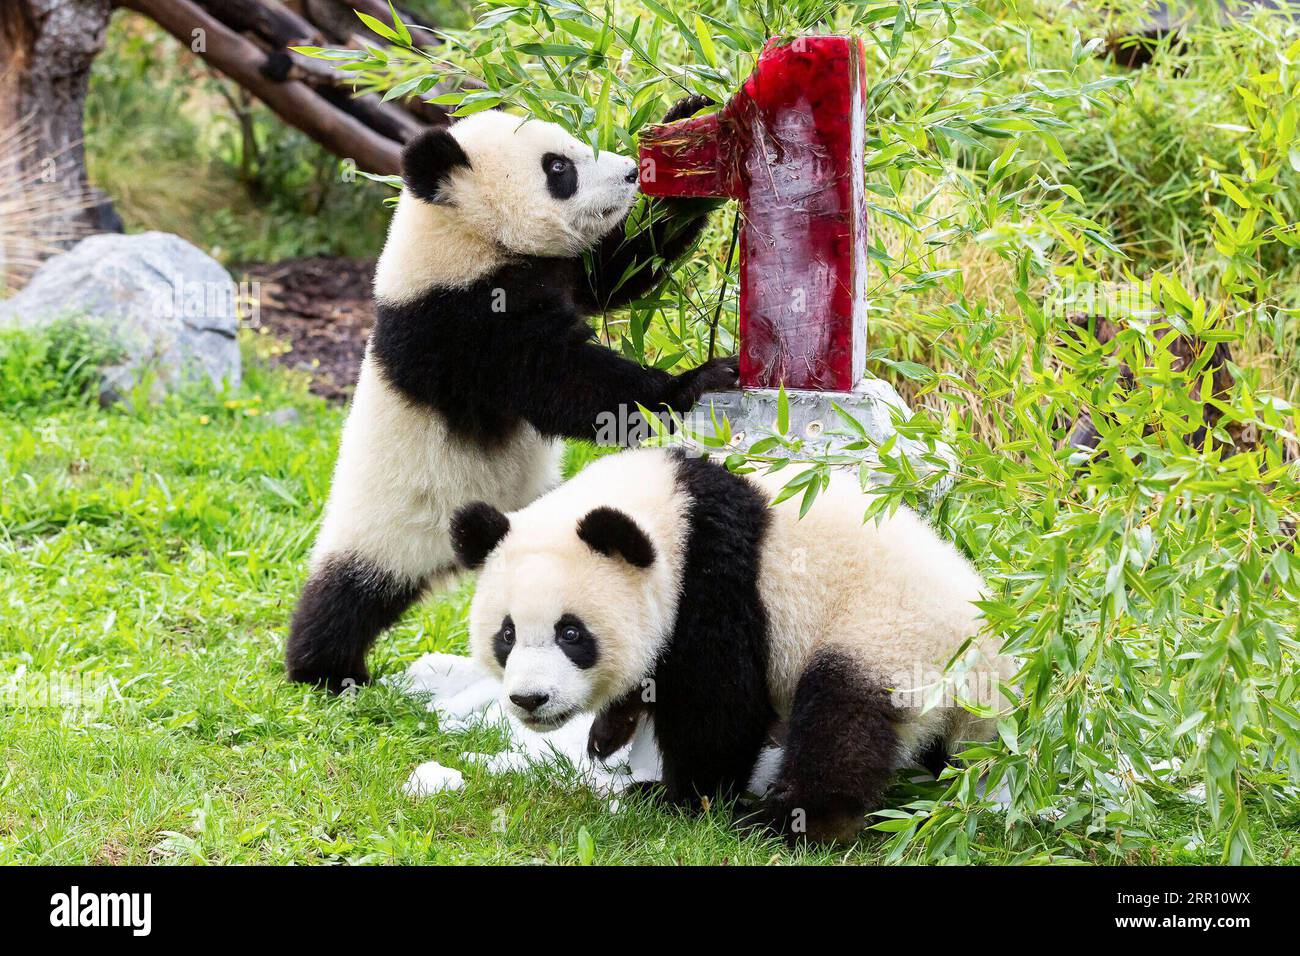 Bilder des Jahres 2020, Entertainment 09 September Entertainment Themen der Woche KW36 Bilder des Jahres 2020, Entertainment 08 August News Bilder des Tages 200831 -- BERLIN, Aug. 31, 2020 -- Giant panda twins Meng Xiang and Meng Yuan are seen near their birthday cake at Berlin Zoo in Berlin, capital of Germany, Aug. 31, 2020. The giant panda twins Meng Xiang and Meng Yuan, which were the first-ever twin giant pandas born in Germany, celebrated their first birthday at the zoo on Monday. Berlin Zoo/Handout via Xinhua FOR EDITORIAL USE ONLY GERMANY-BERLIN-GIANT PANDA TWINS-1ST BIRTHDAY CELEBRATI Stock Photo